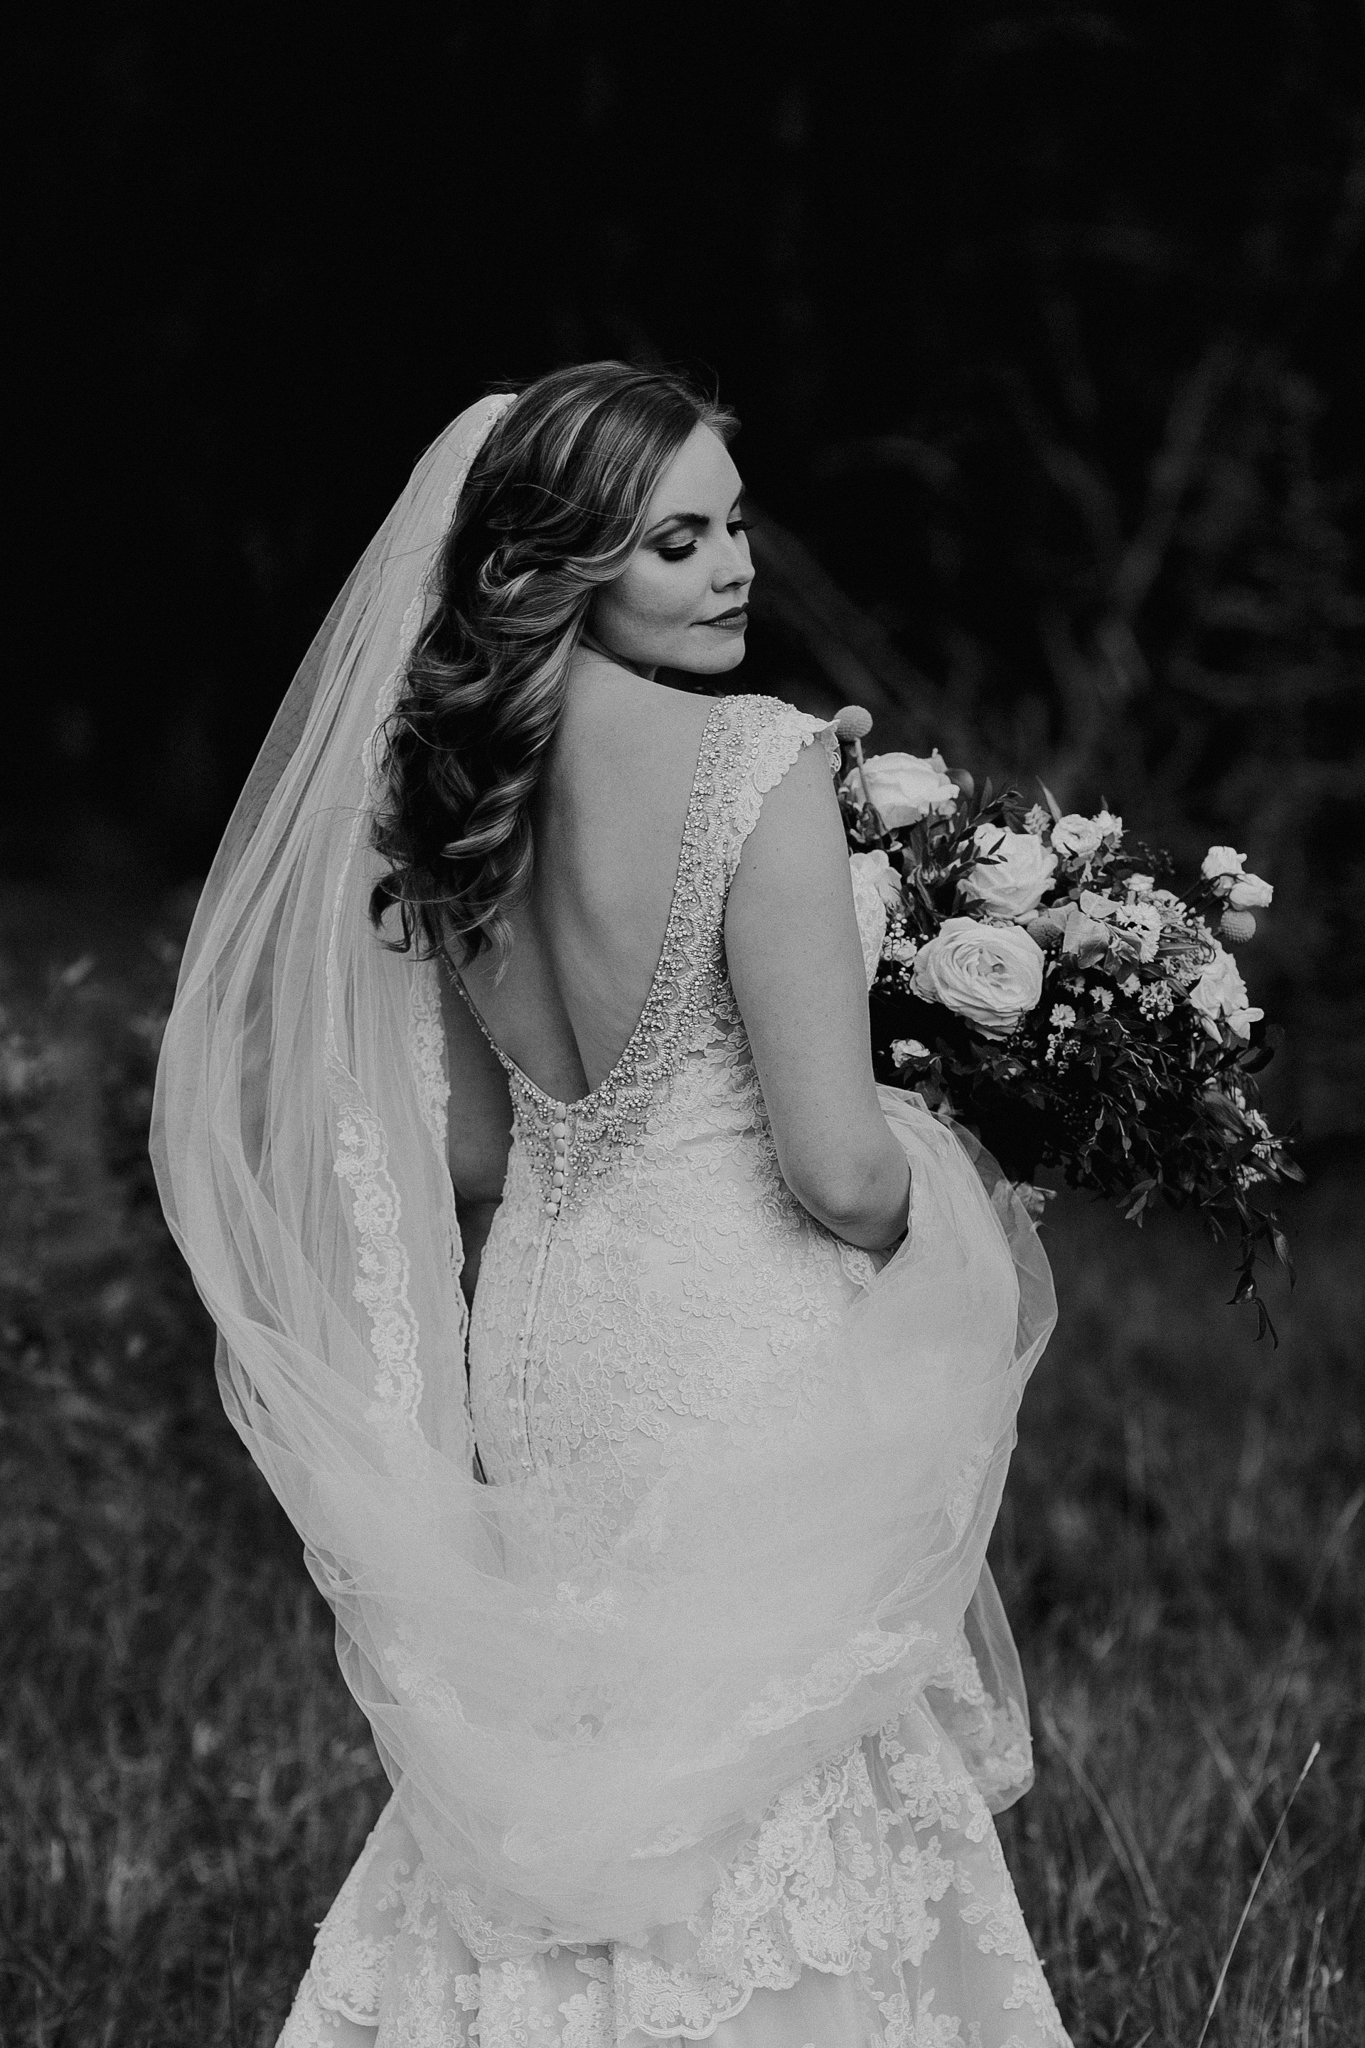 Bride poses for photo in black and white portrait at Silvertip Resort Canmore destination wedding